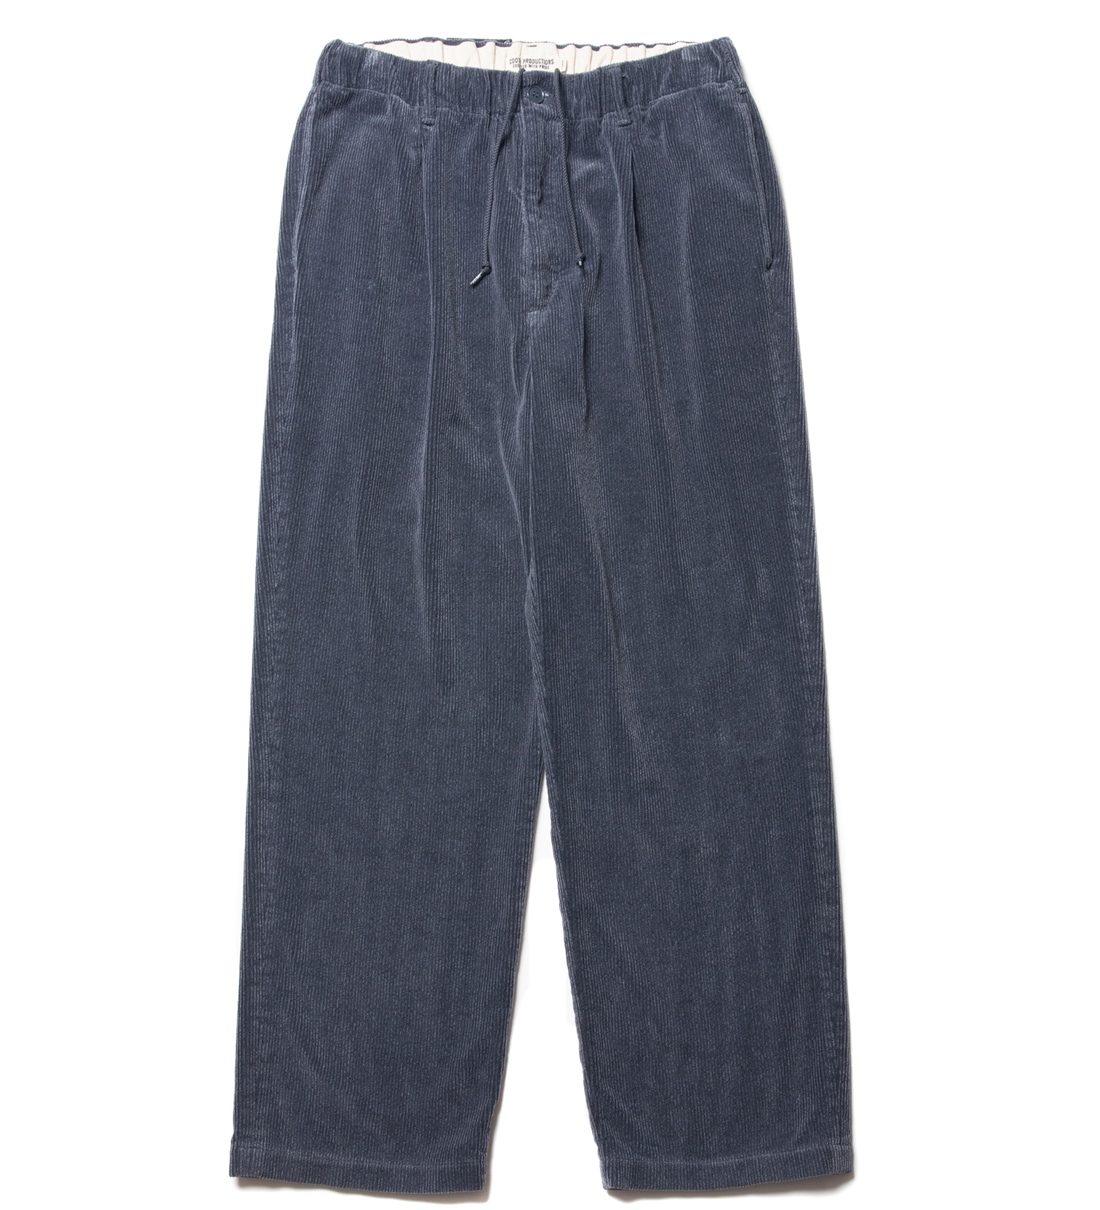 COOTIE PRODUCTIONS/Twisted Heather Corduroy 1 Tuck Easy Pants